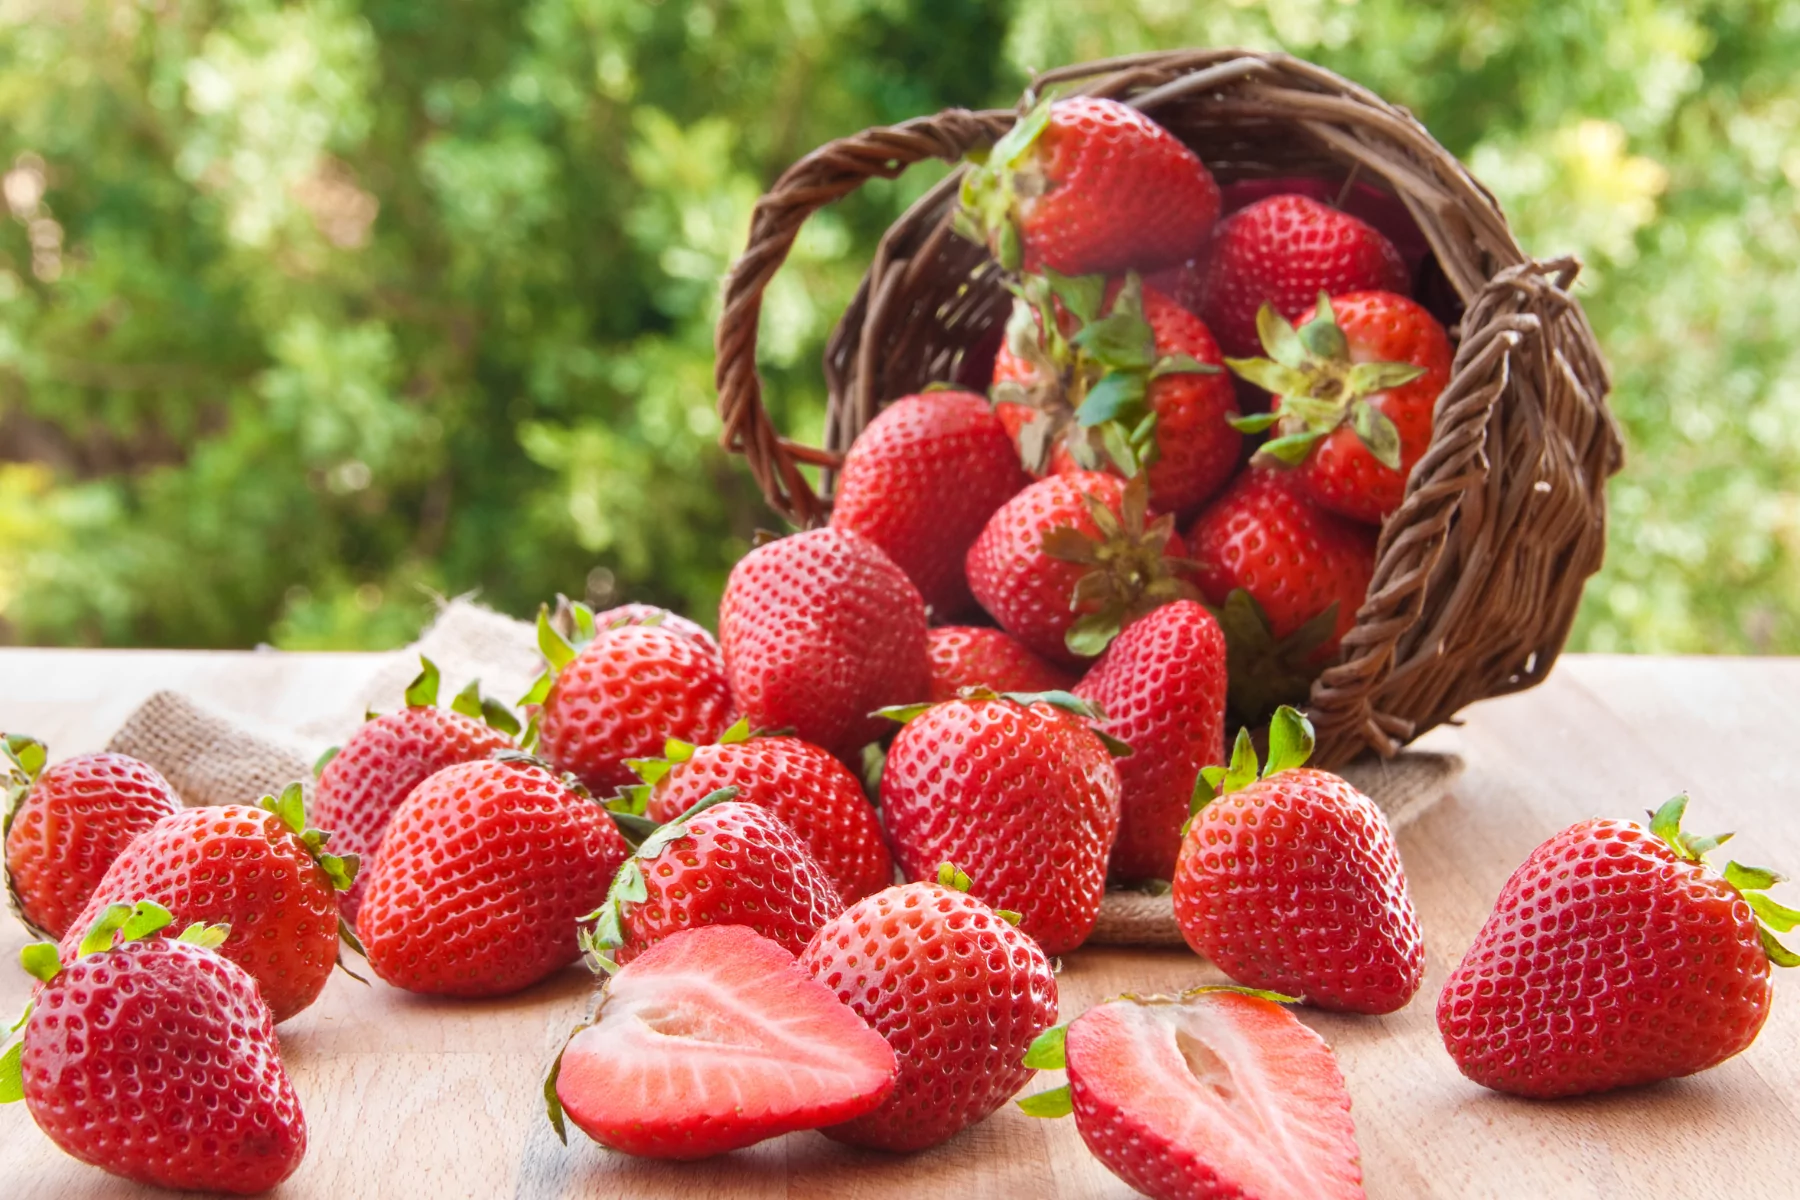 May is National Strawberry Month - and there are many reasons to celebrate this delicious berry! 